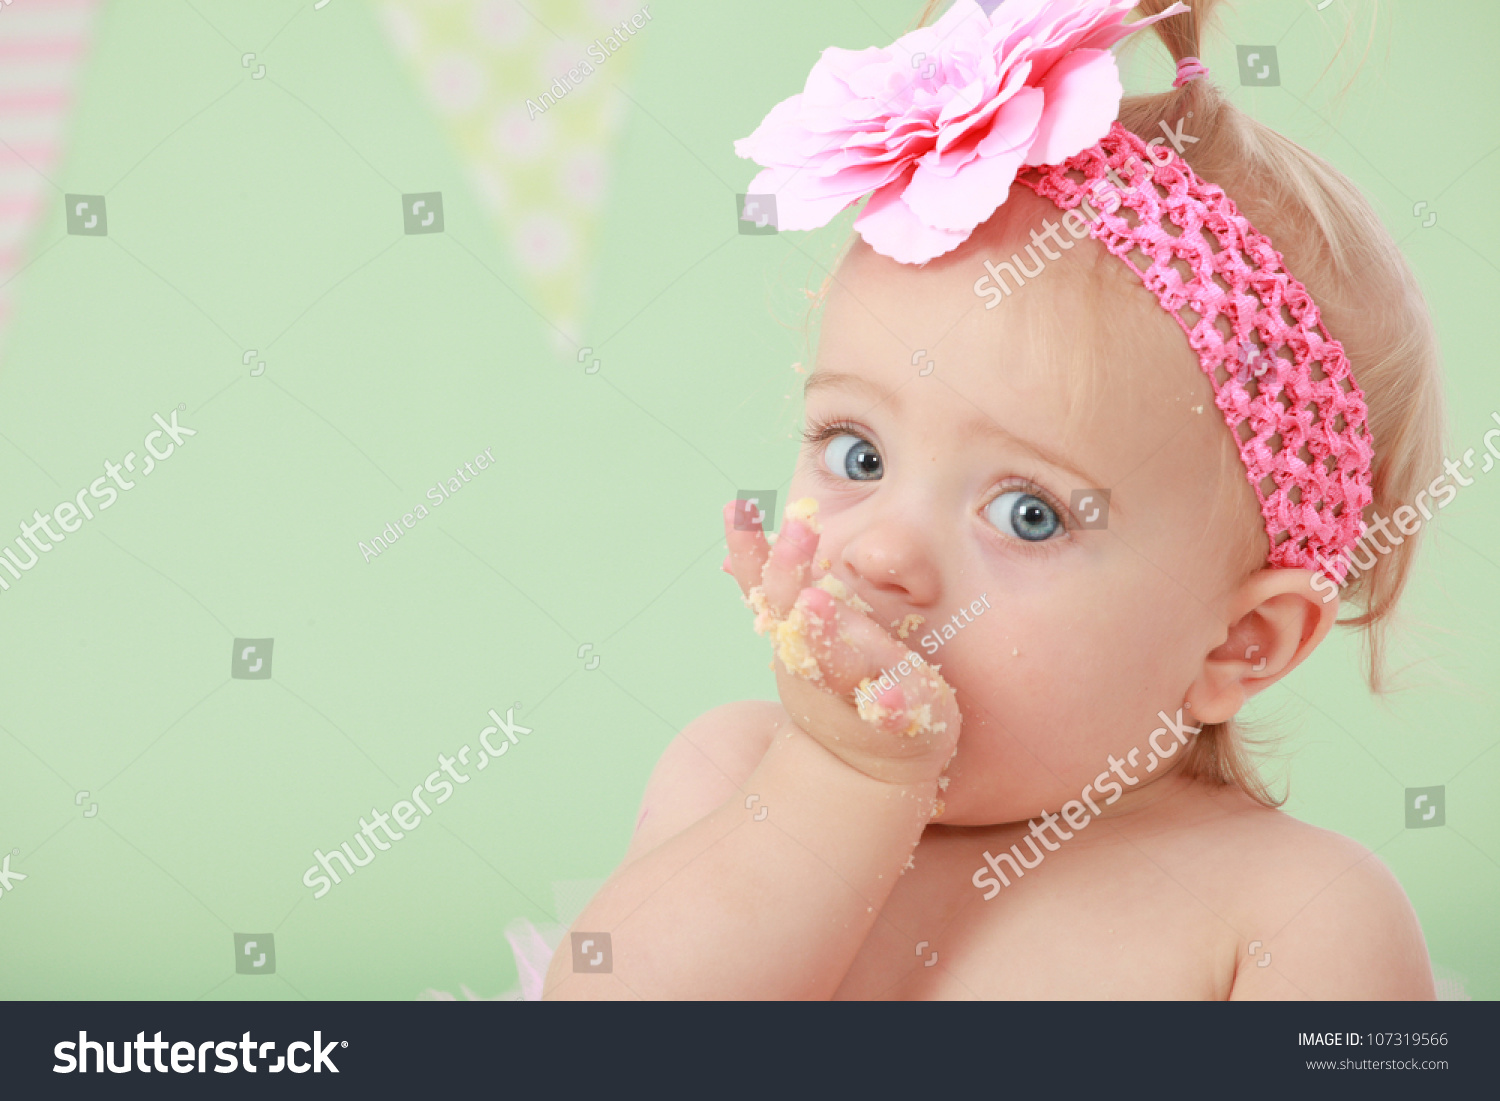 Adorable Blond Hair Big Blue Eyed Baby Stock Photo 107319566